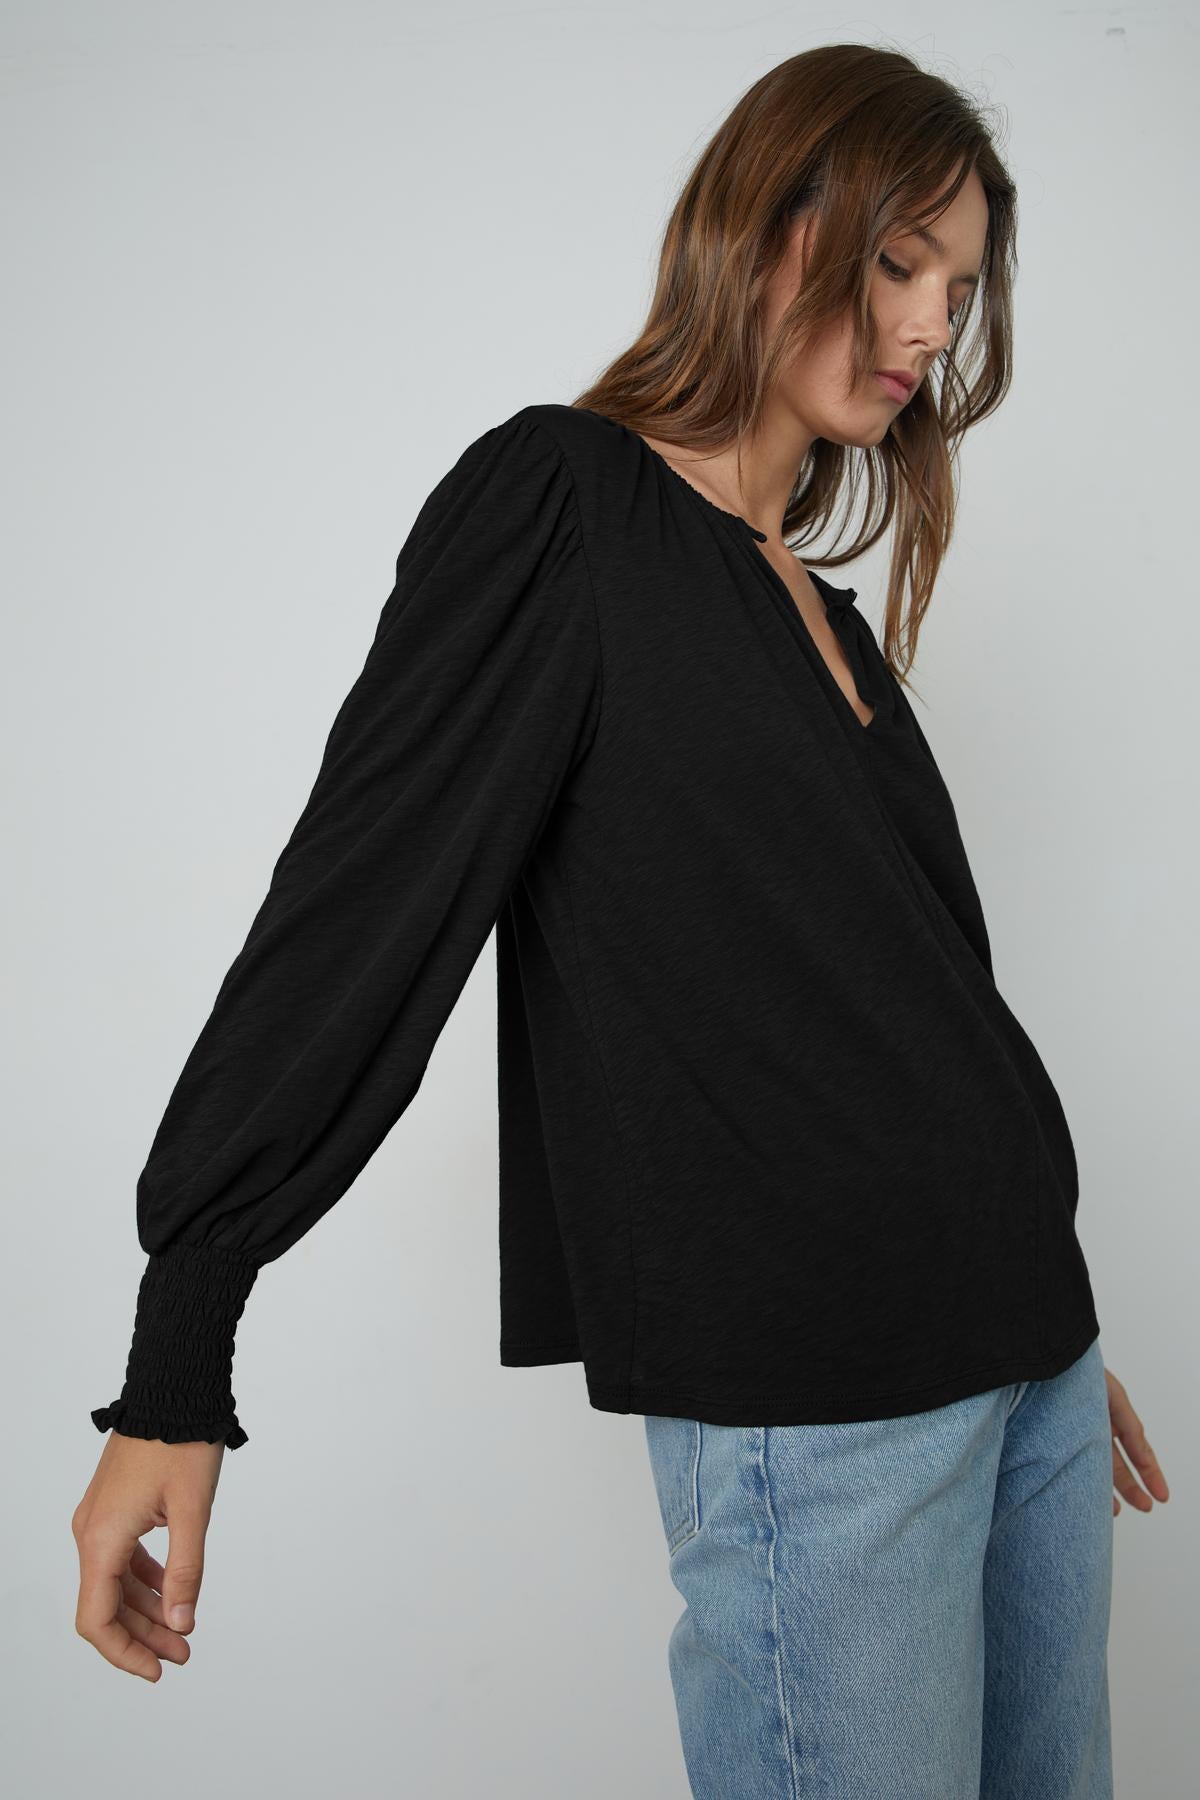 The IRINA SPLIT NECK TEE by Velvet by Graham & Spencer is worn by a woman.-26883564896449